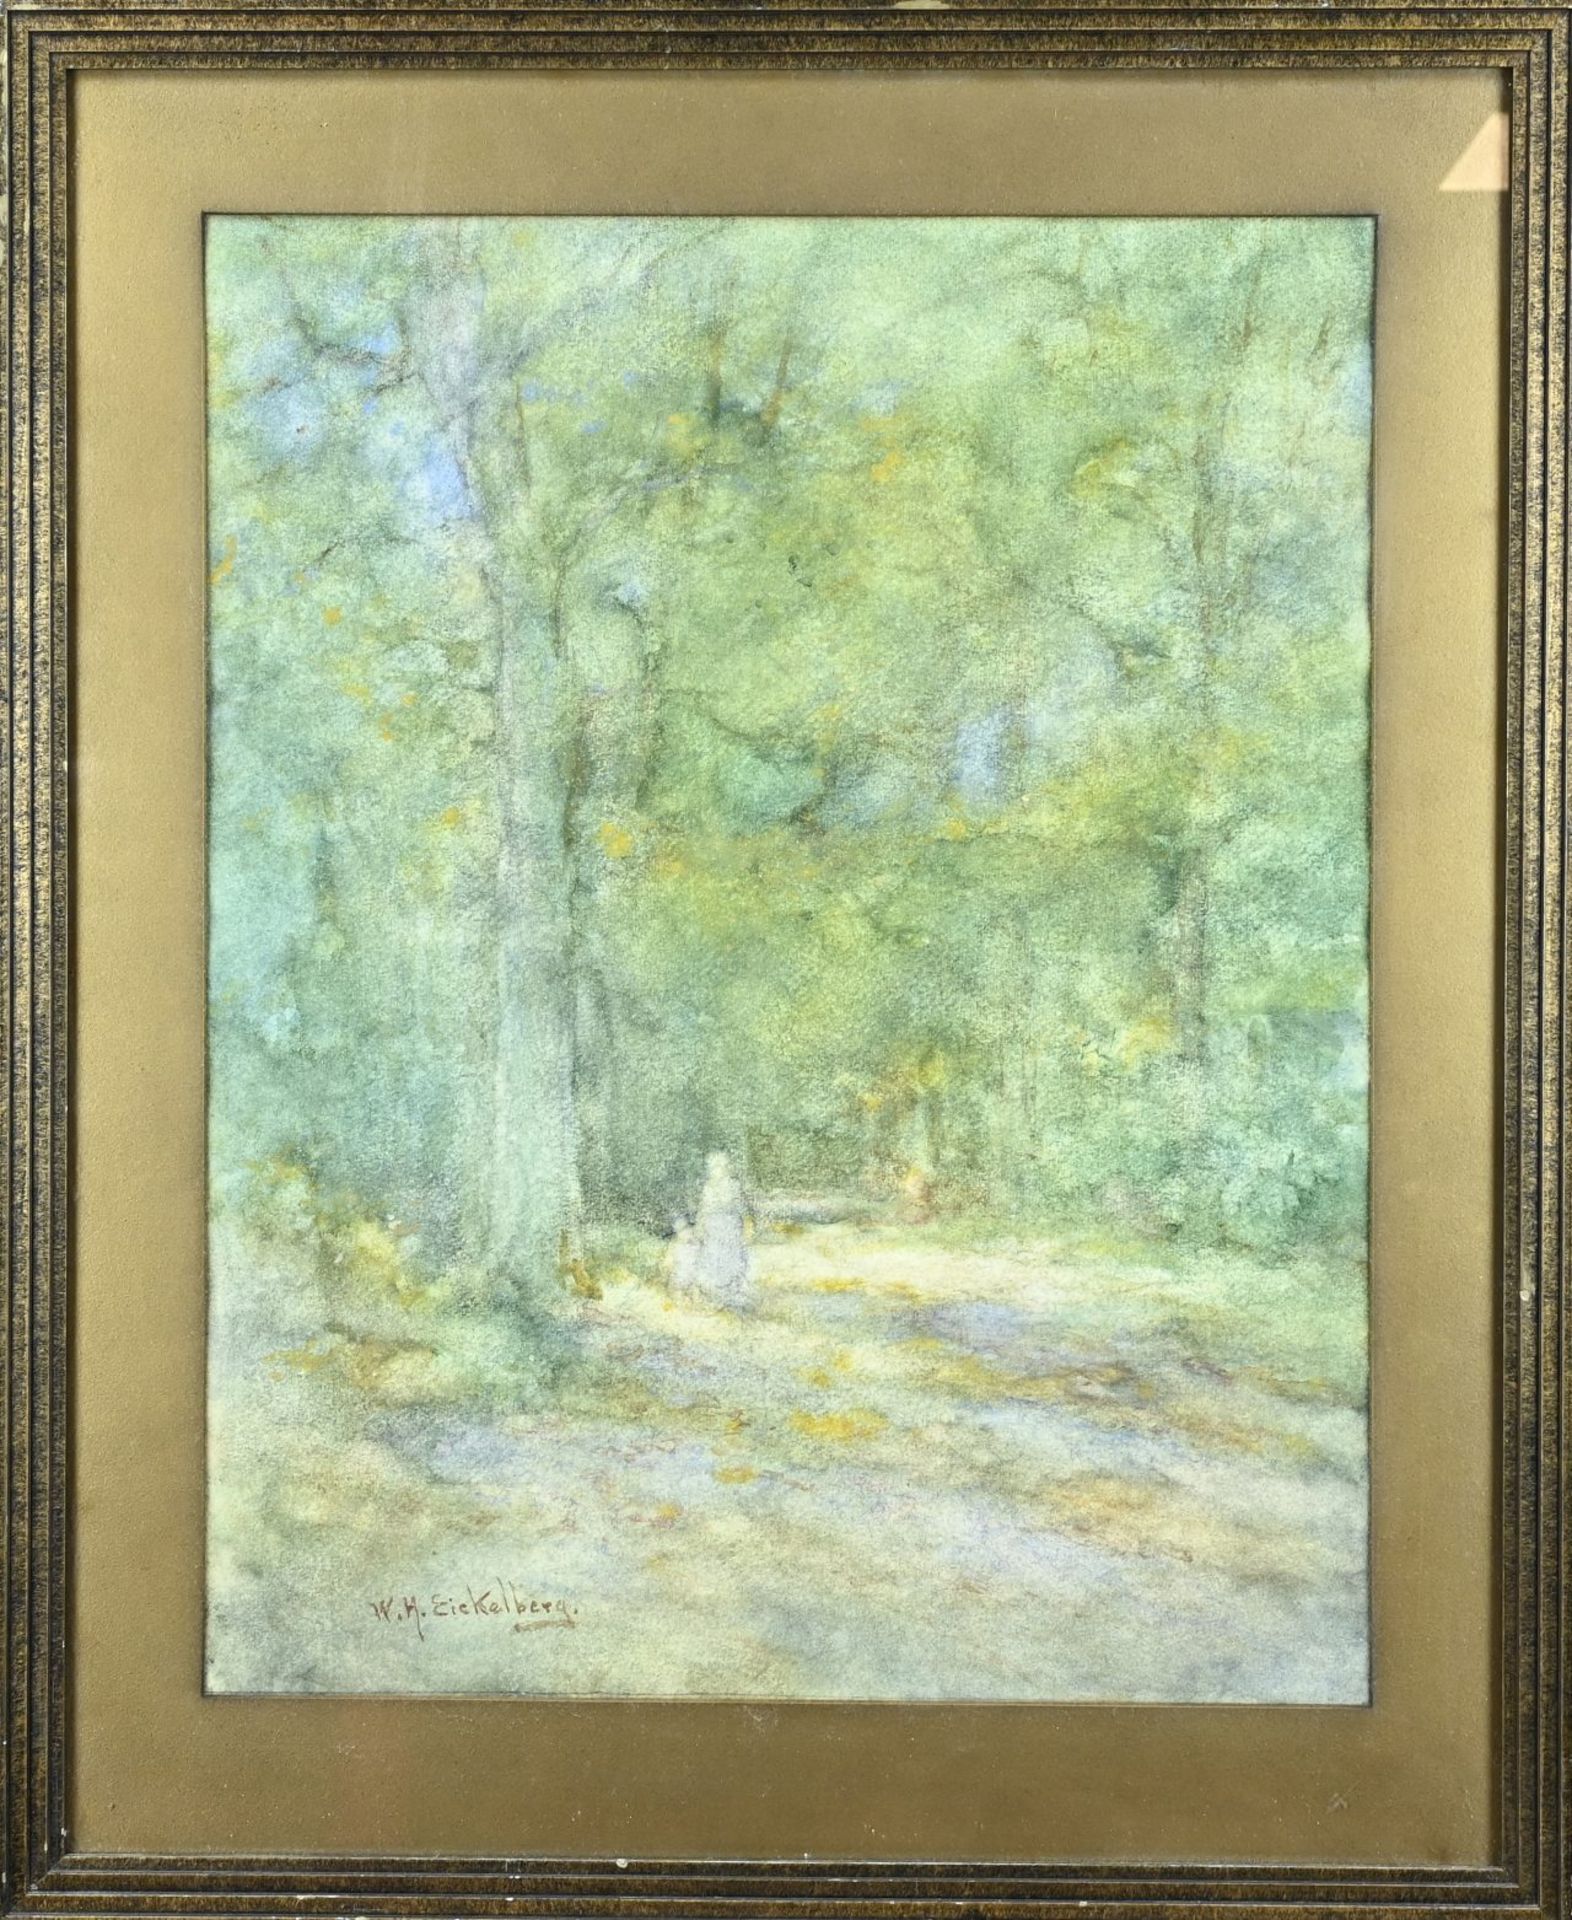 WH Eickelberg, Forest view with mother and child